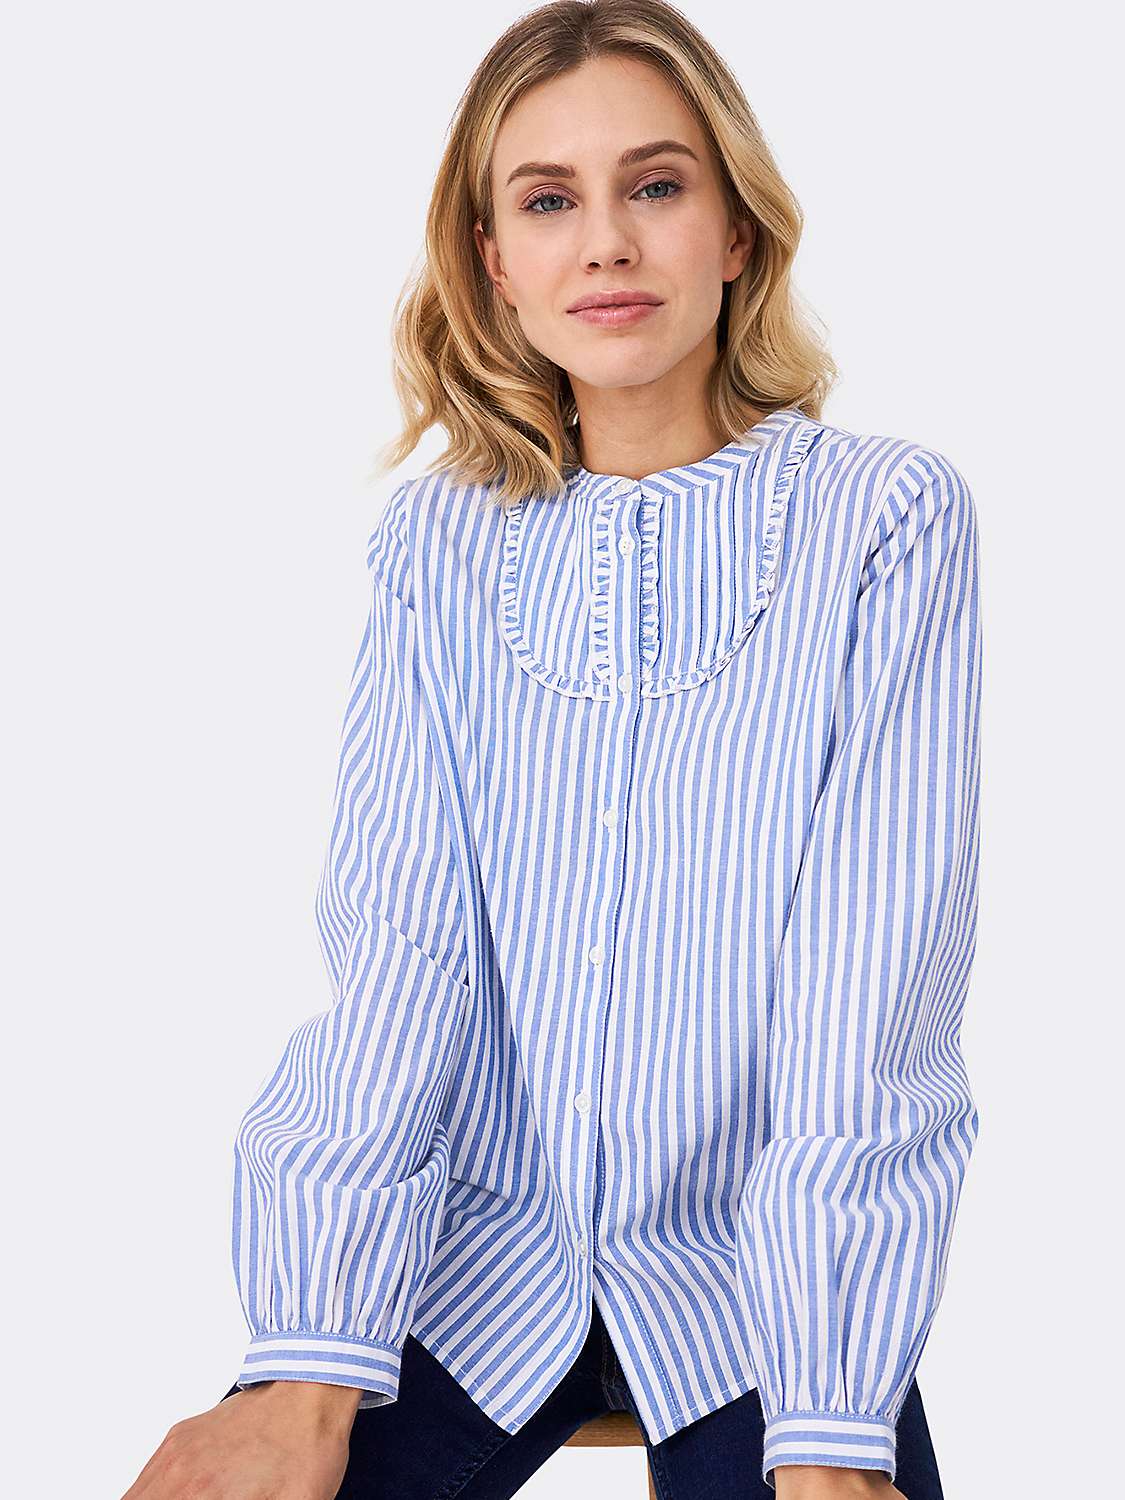 Buy Crew Clothing Ivy Cotton Stripe Long Sleeve Shirt, Mid Blue Online at johnlewis.com